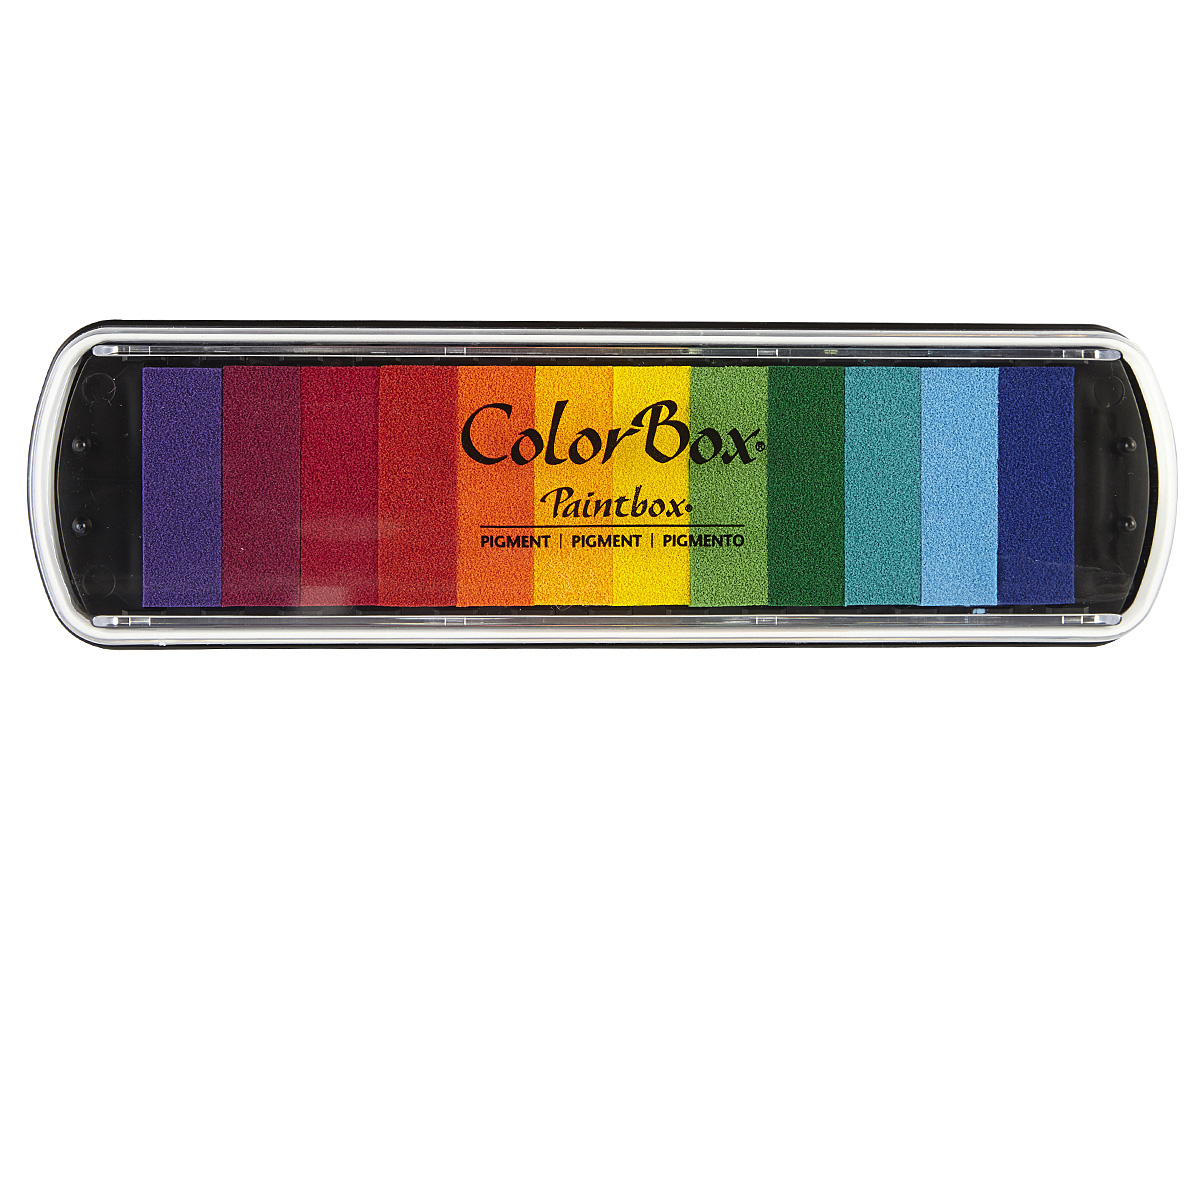 Colorbox Paintbox Ink